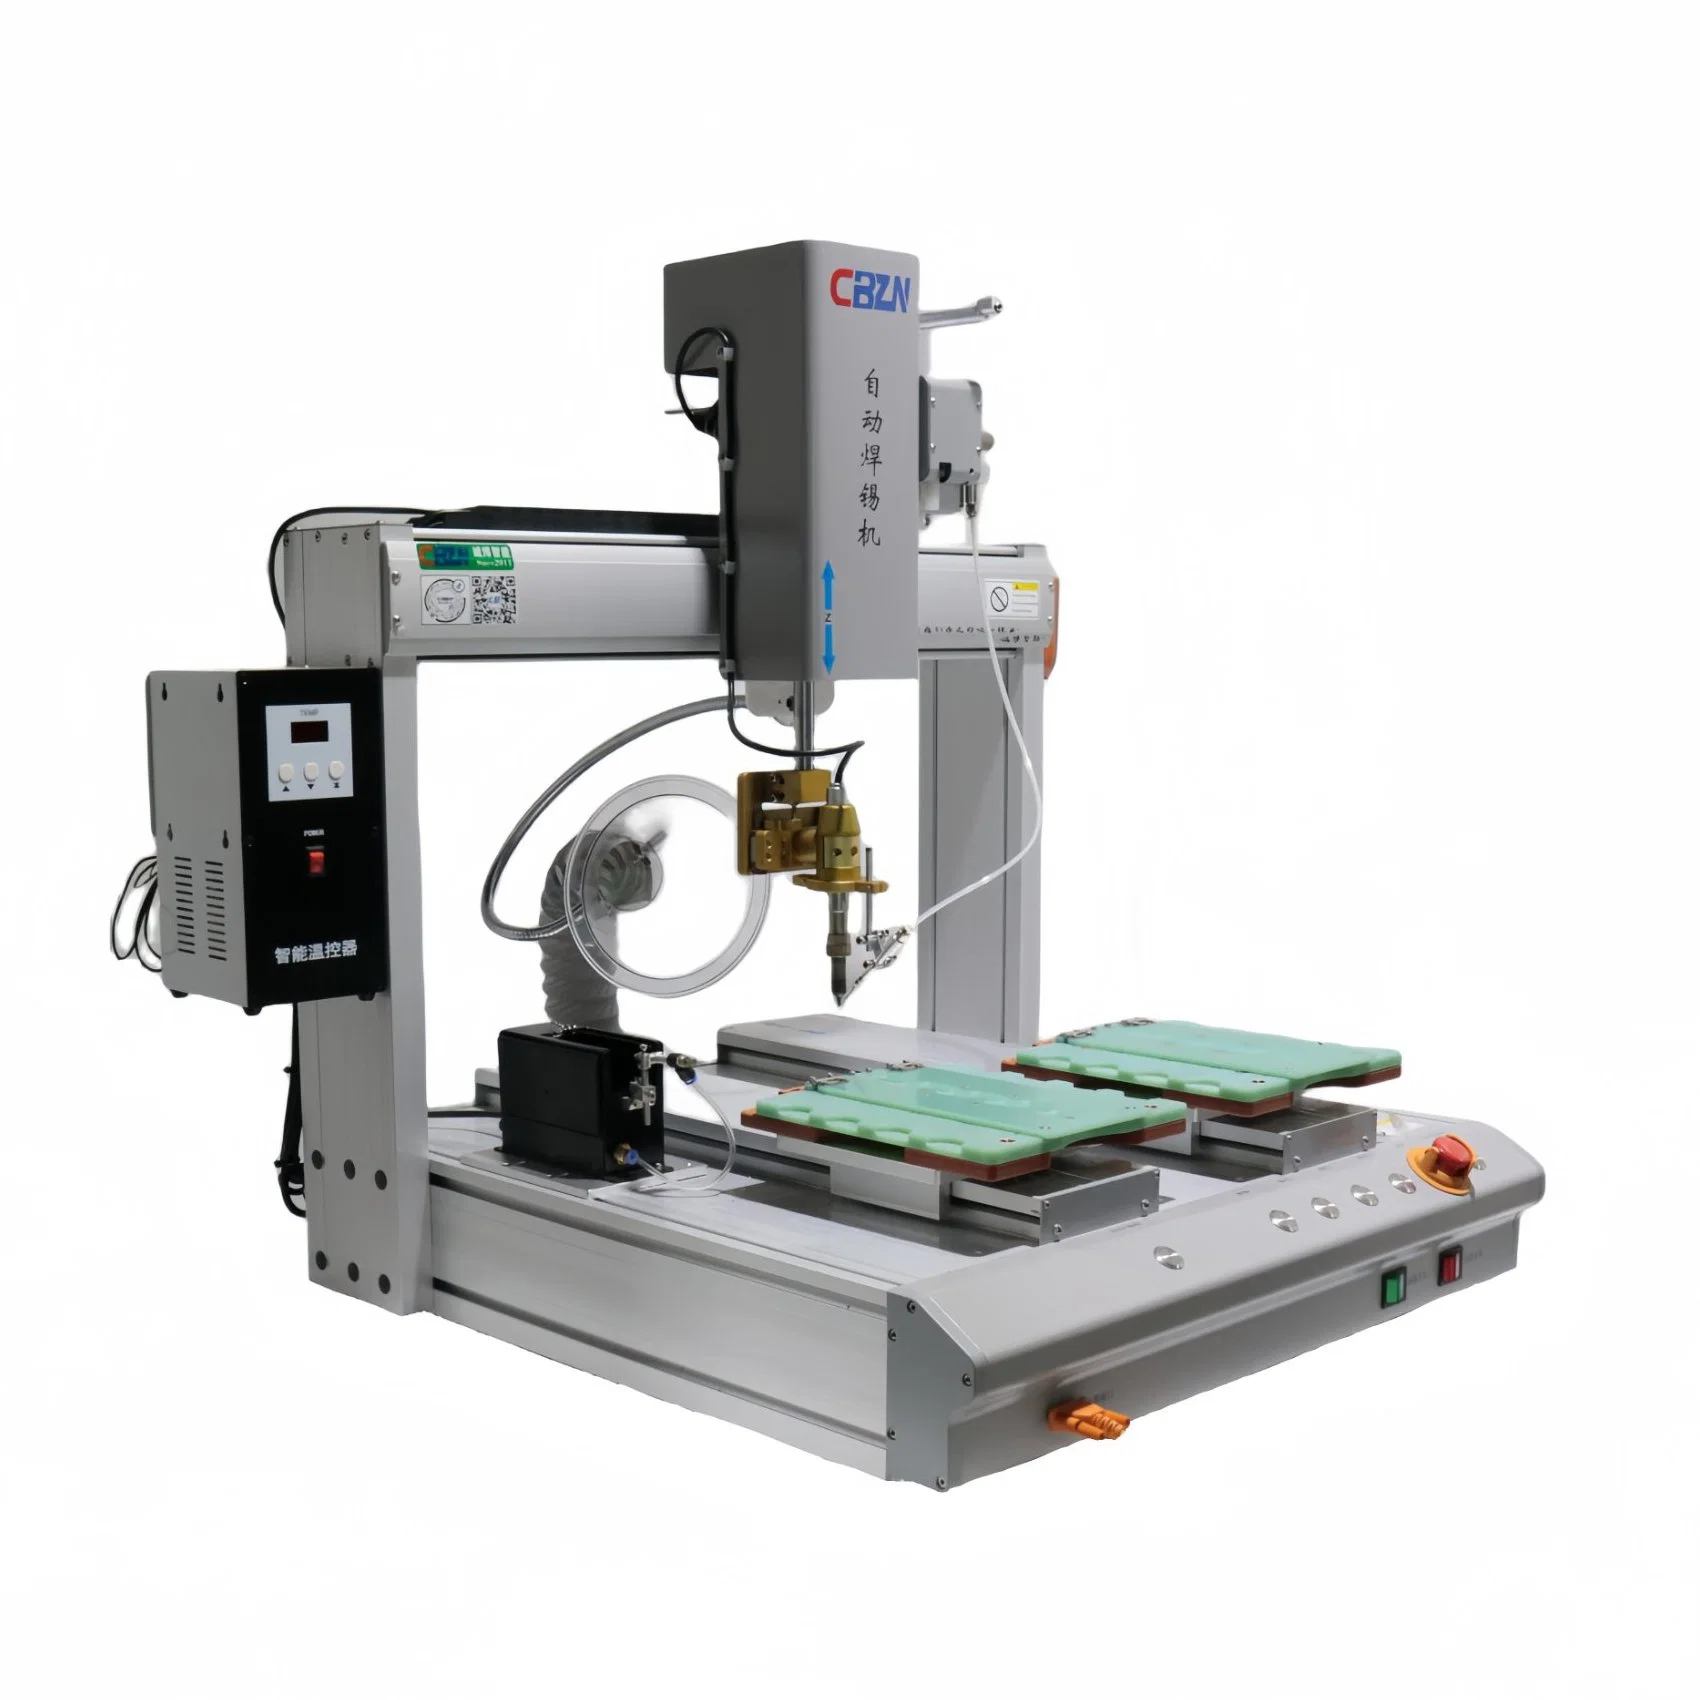 Ra Full Automatic Soldering Station for Customize Flowing Line Online Electric Toy/PCB/Wire Auto Customized Solder Robot/Electronics Assemble Machine